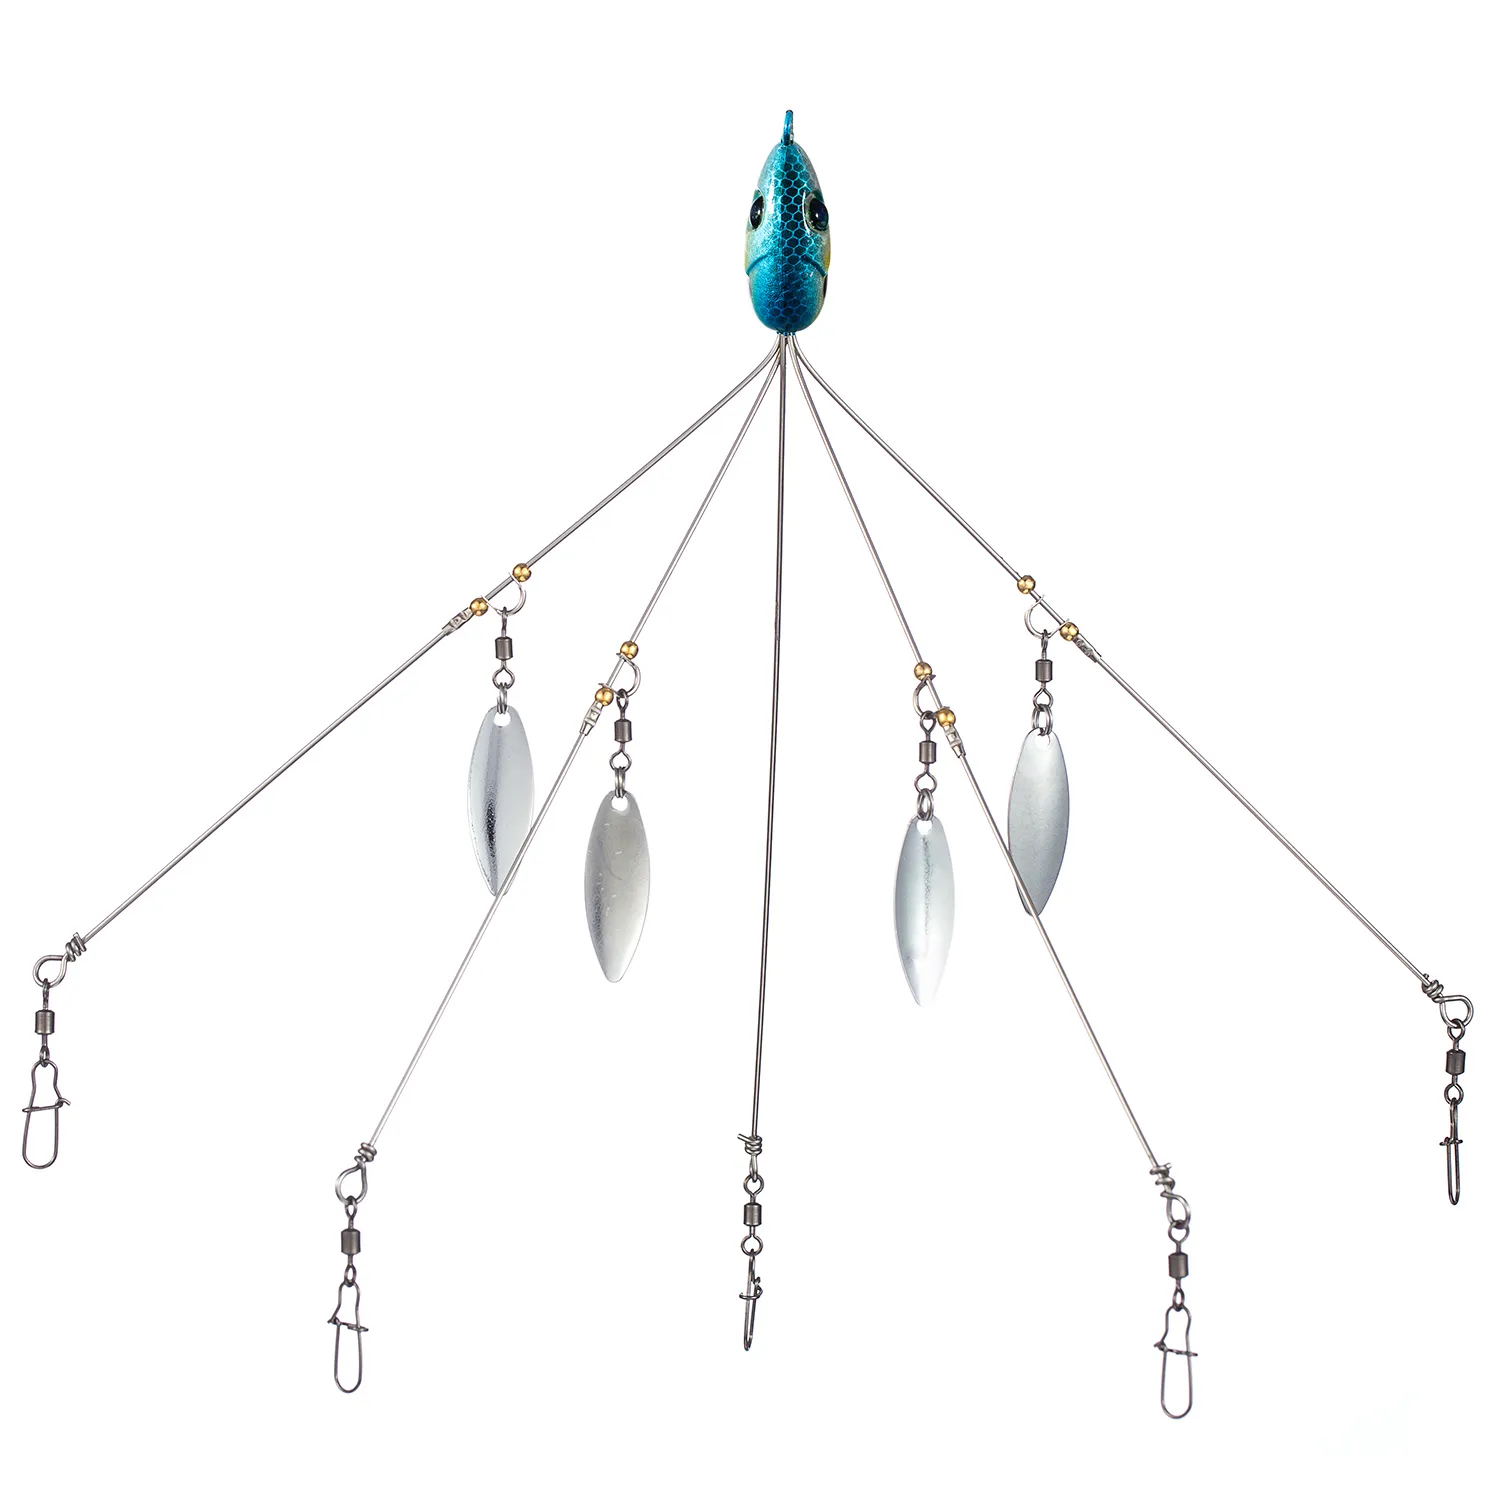 Bassdish Alabama Rig Head Swimming Bait Umbrella Rig 5 Arms Bass Fishing  Group Lure, Extendable 18g Y200830279b From Kcmf657, $66.72